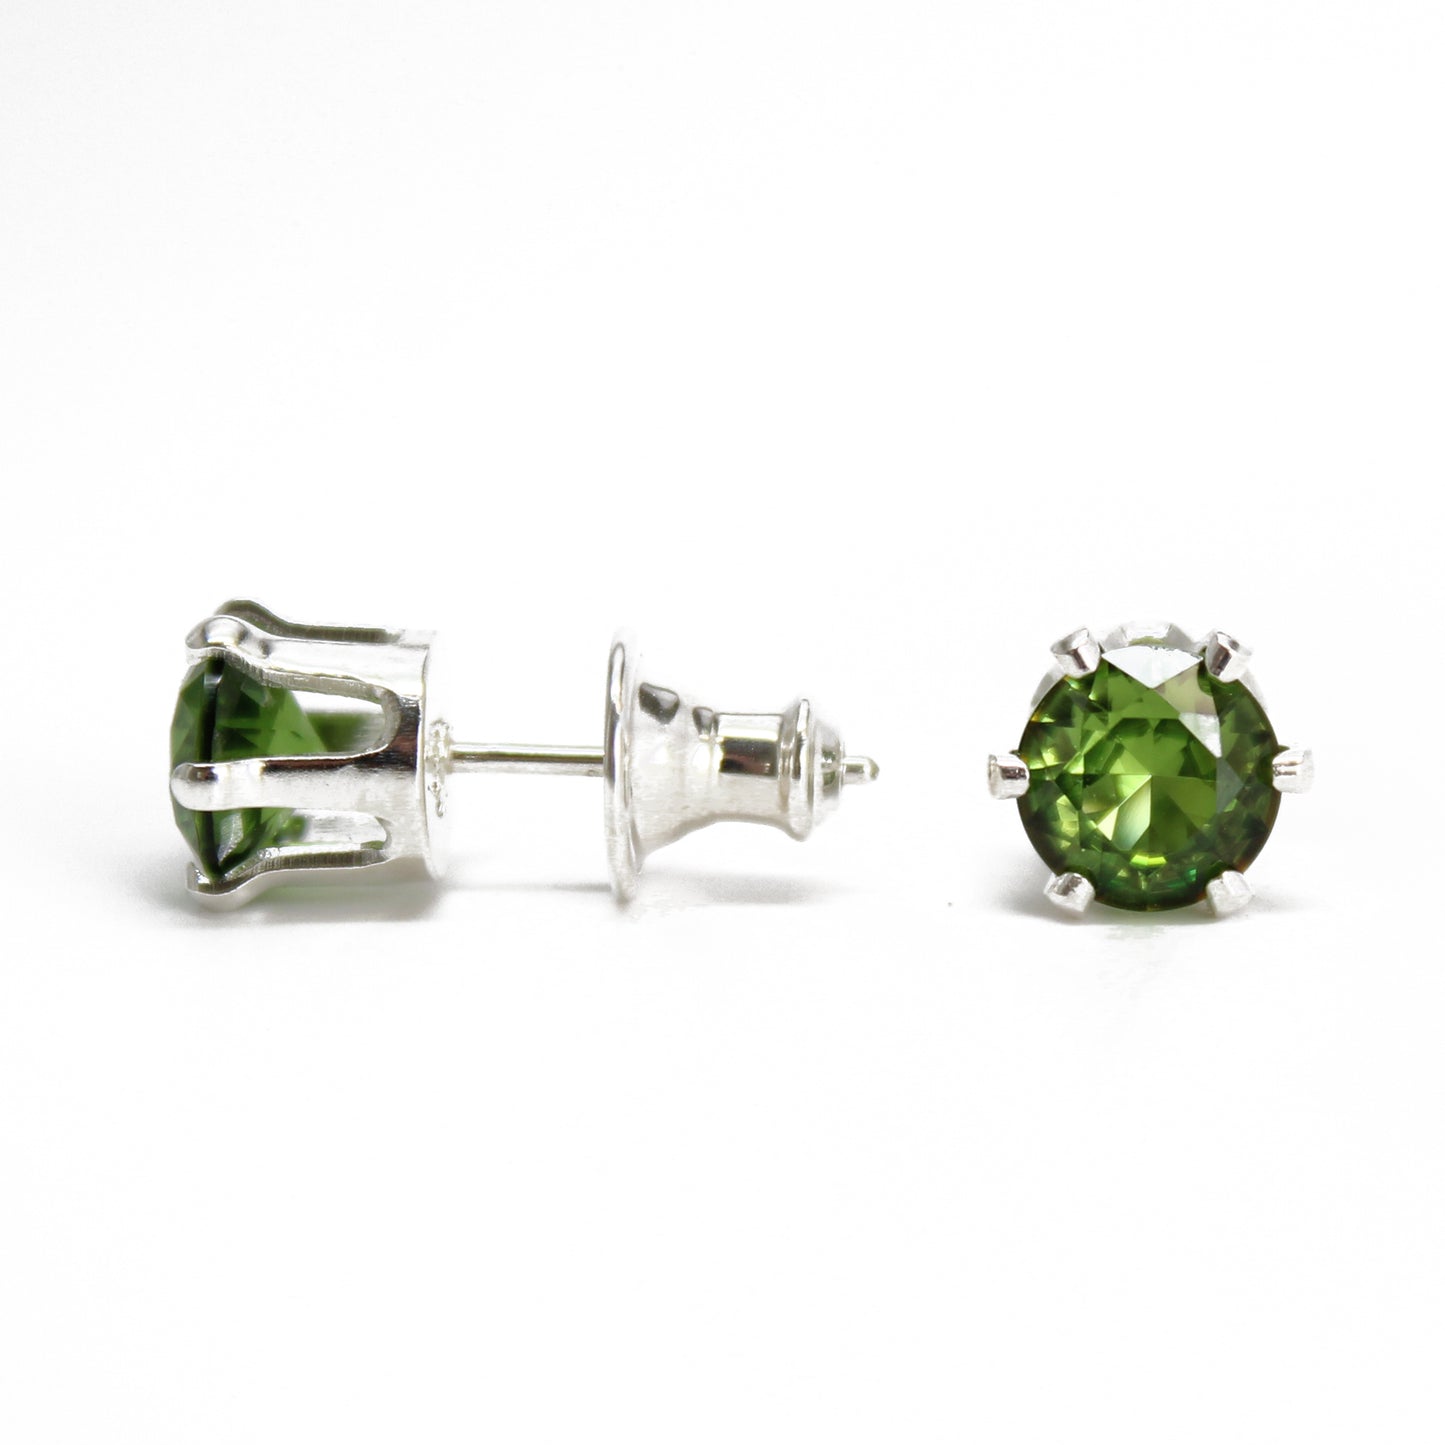 6mm Prong Set Simulated Peridot Stud Earrings in Sterling Silver